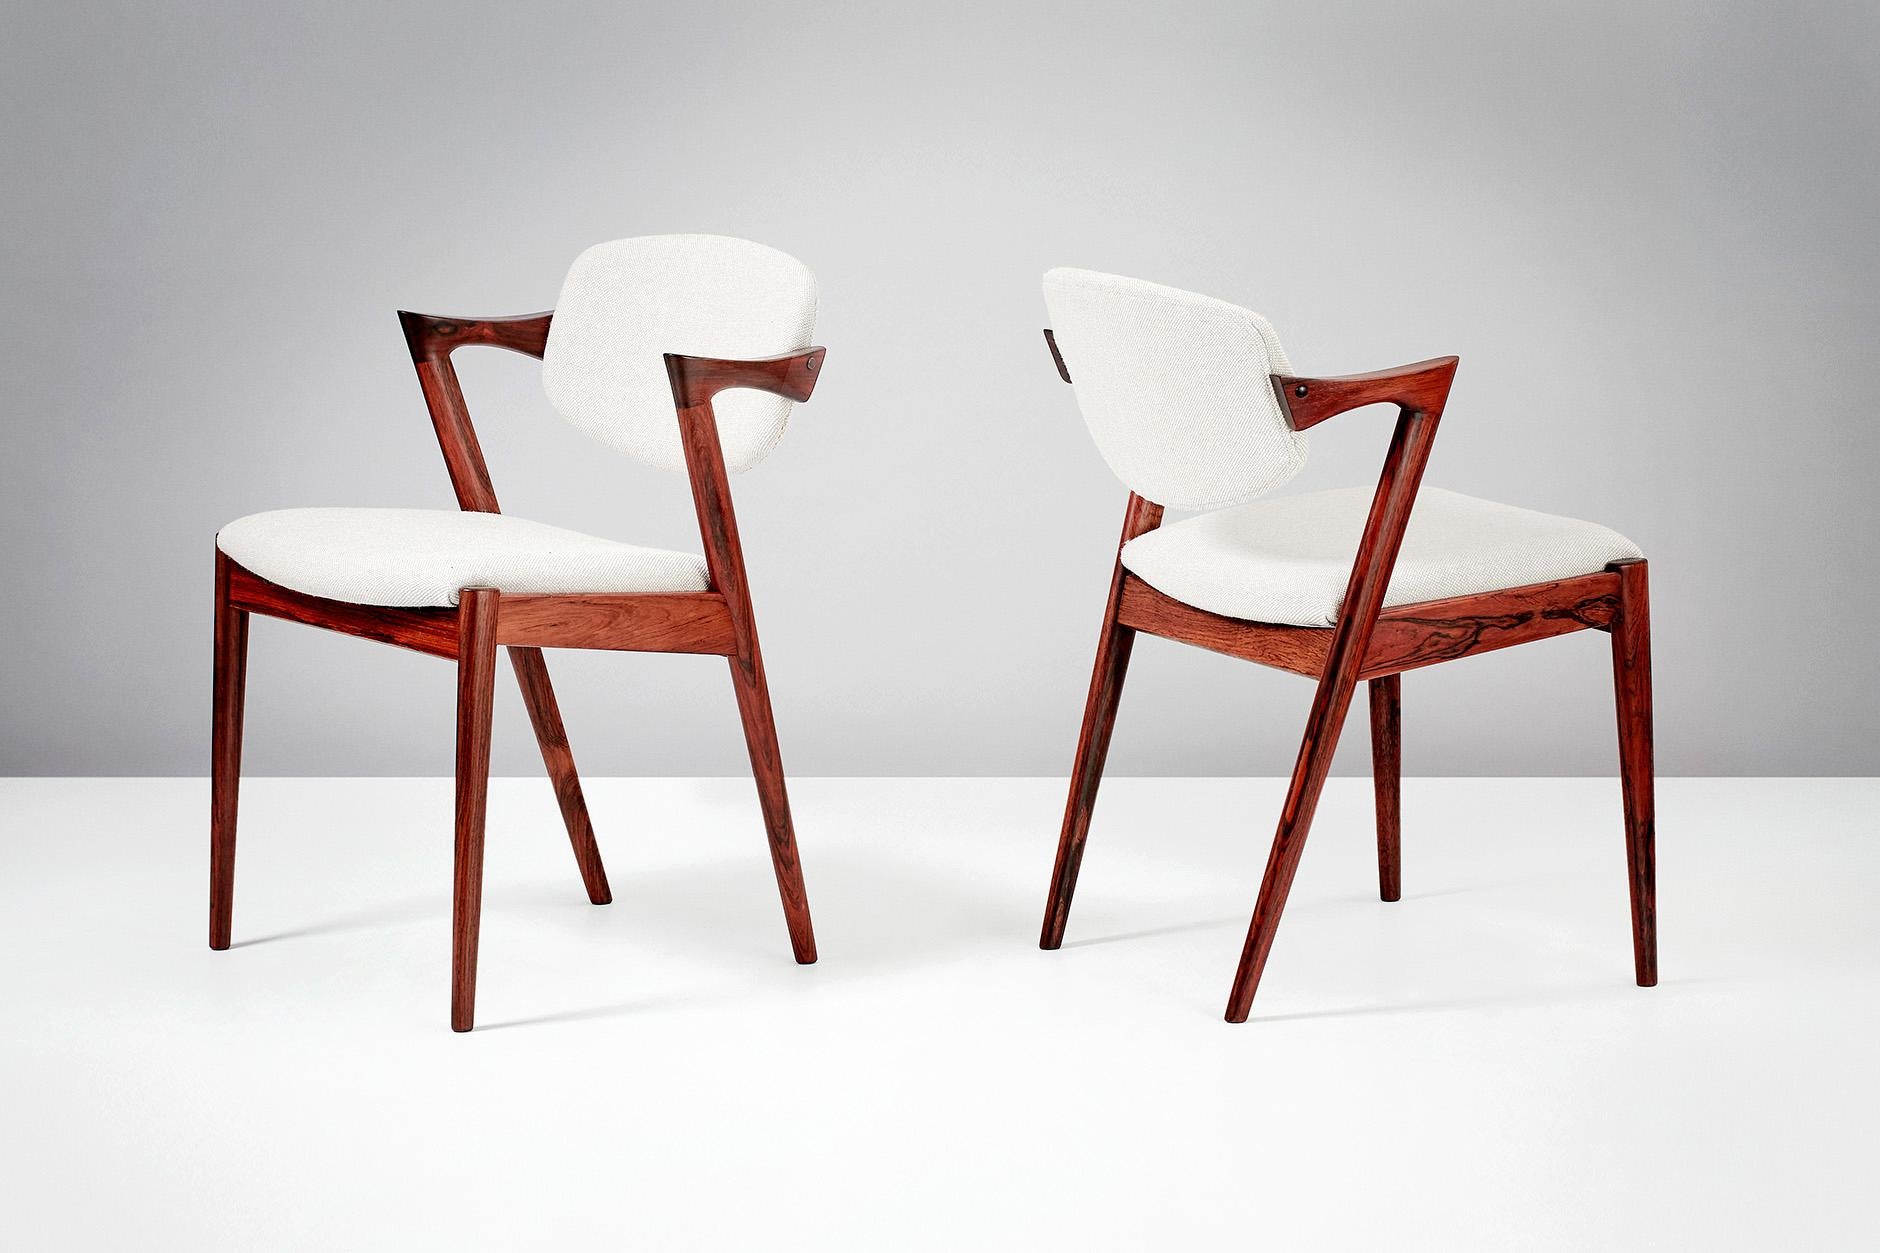 Kai Kristiansen
Model 42 dining chairs, 1956.

Set of 8 dining chairs produced by Skovman Andersen for the Illum Bolighus department store in Copenhagen. Refinished rosewood frames with seat and back reupholstered with Kvadrat Hallingdal wool